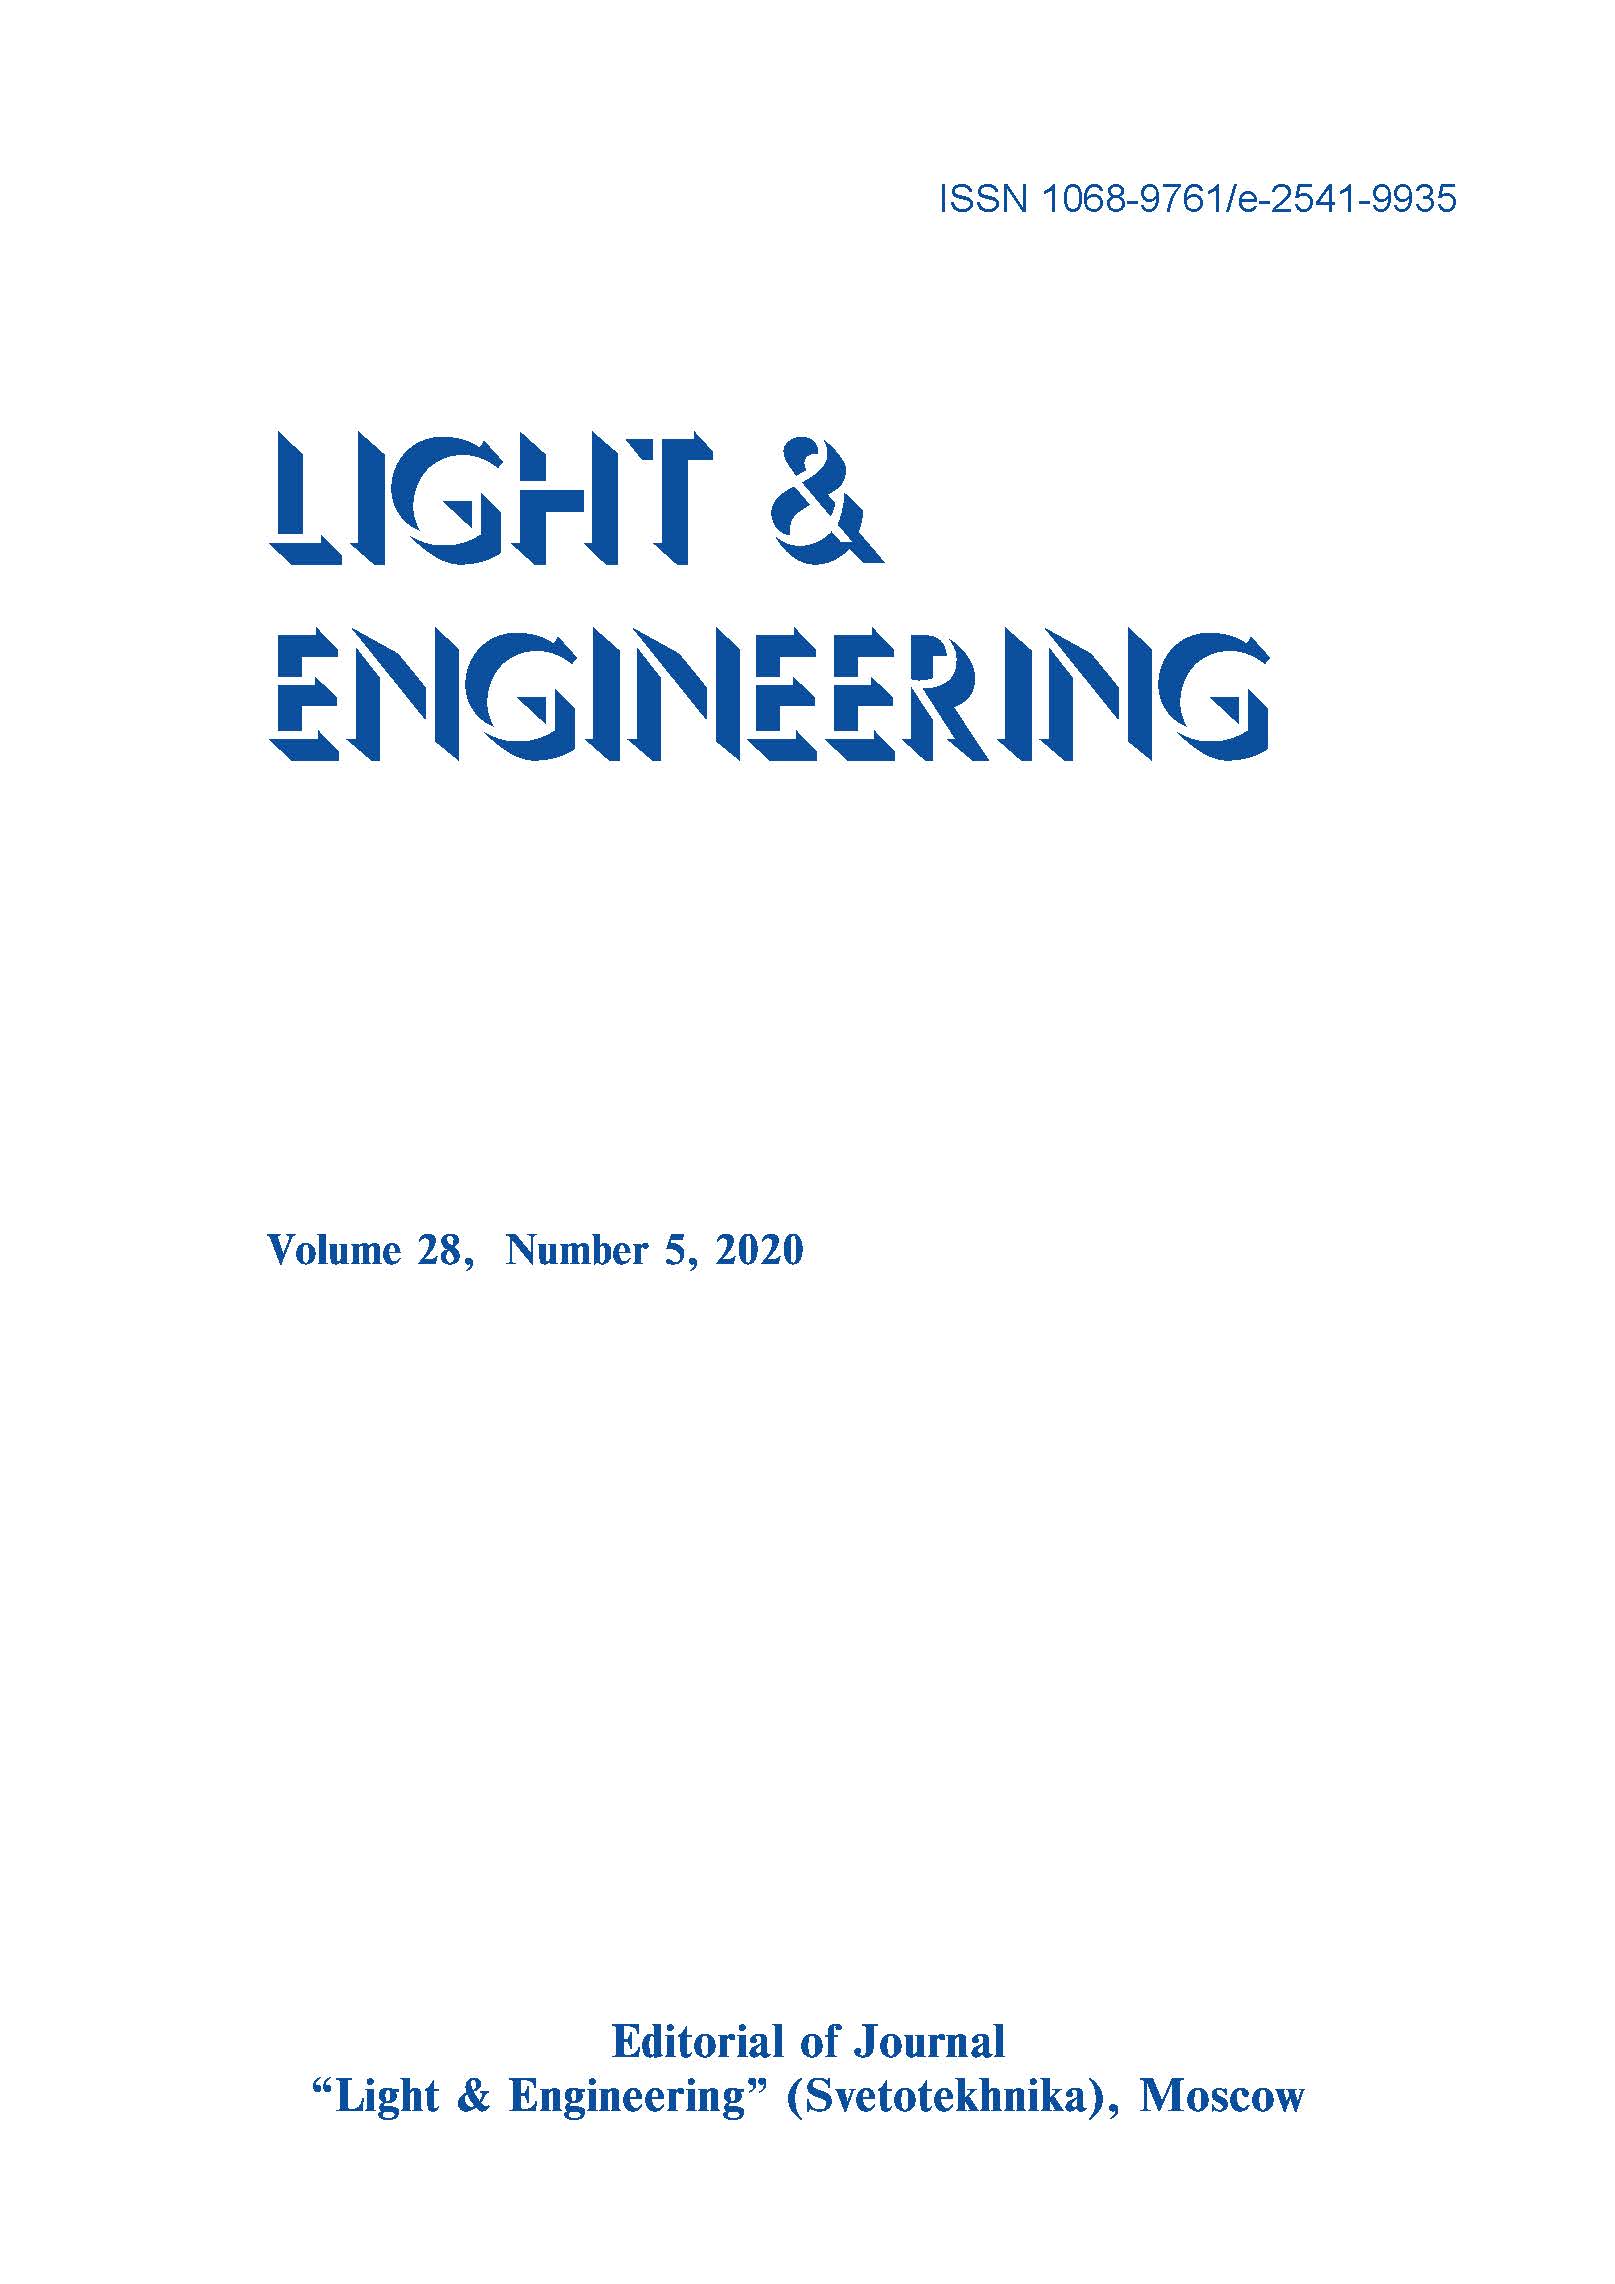 Brightness In The Photopic Range: Psychophysical Modelling With Blue-sensitive Retinal Signals Light & Engineering Vol. 28, No. 5